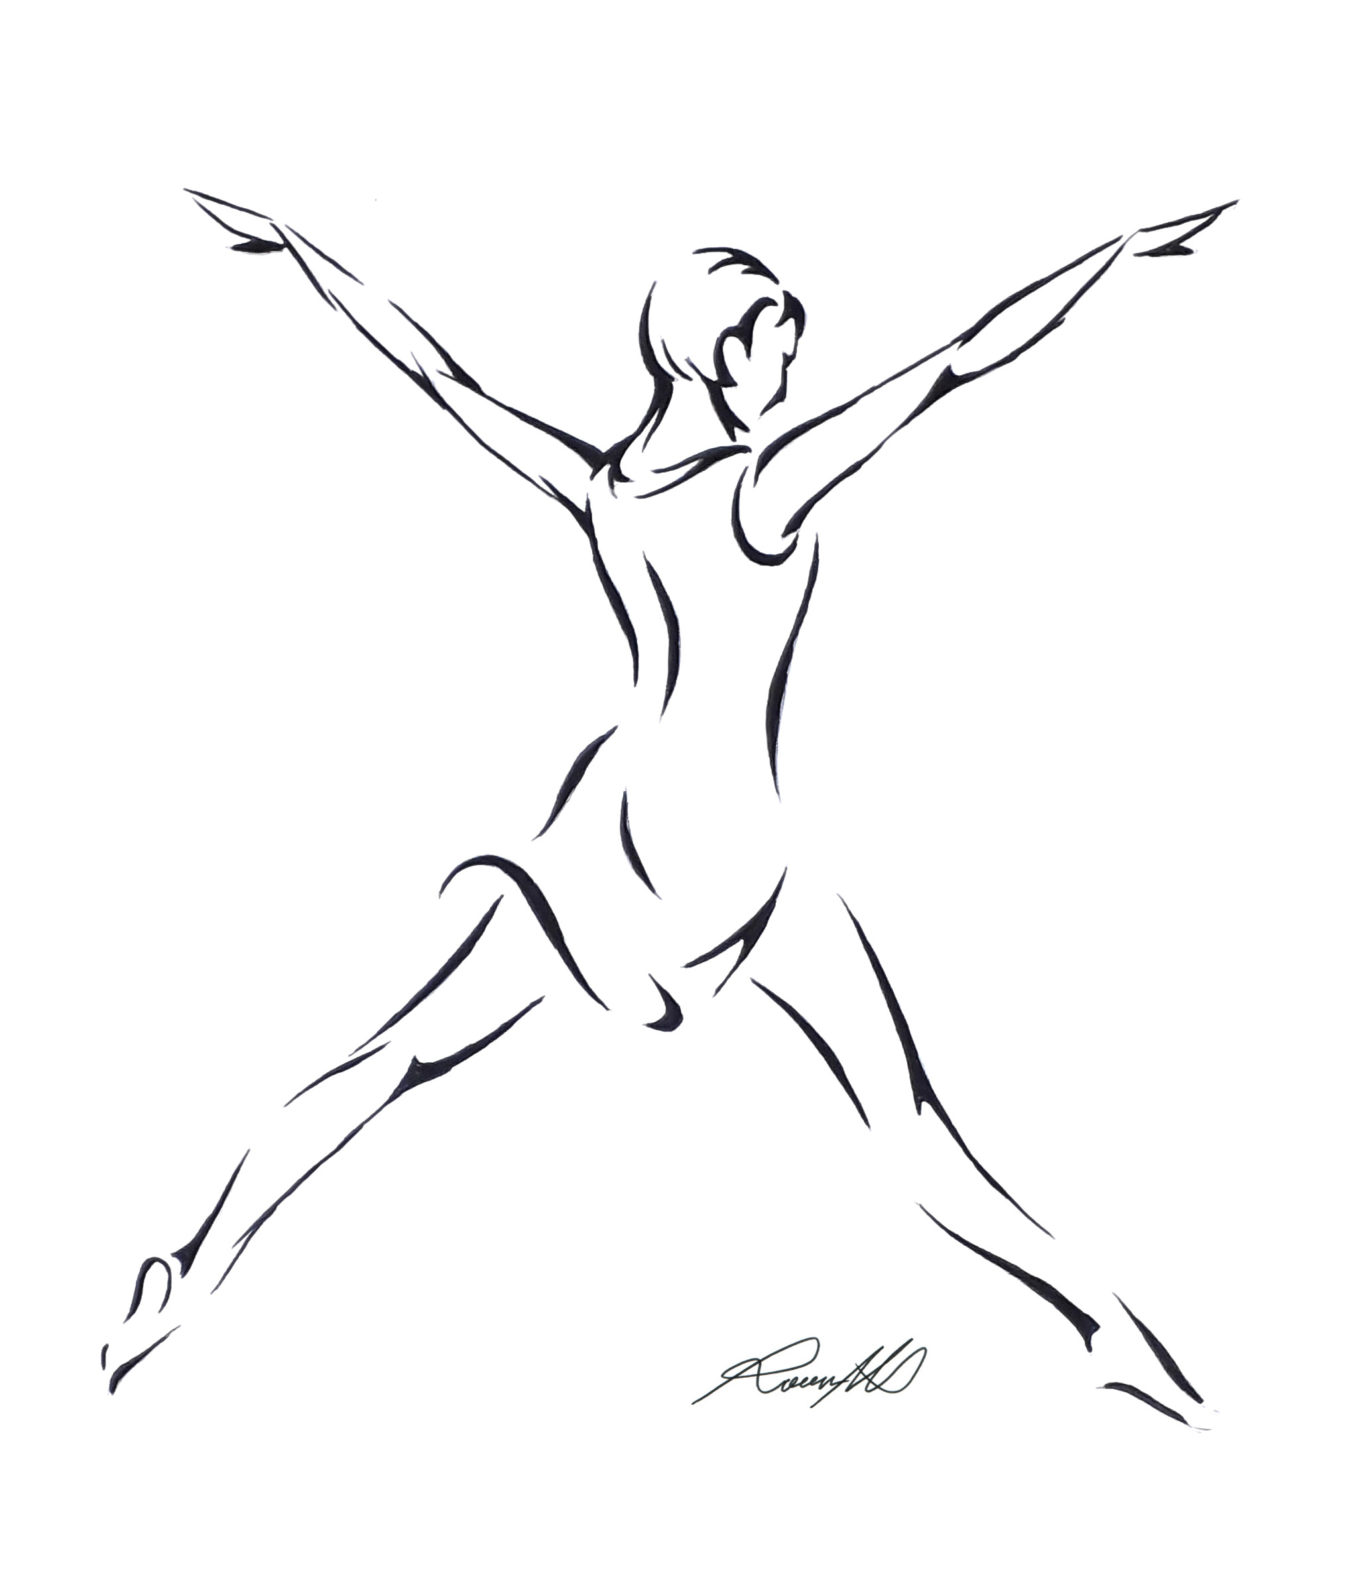 Stunning dance drawings that beautifully capture movement and flow by